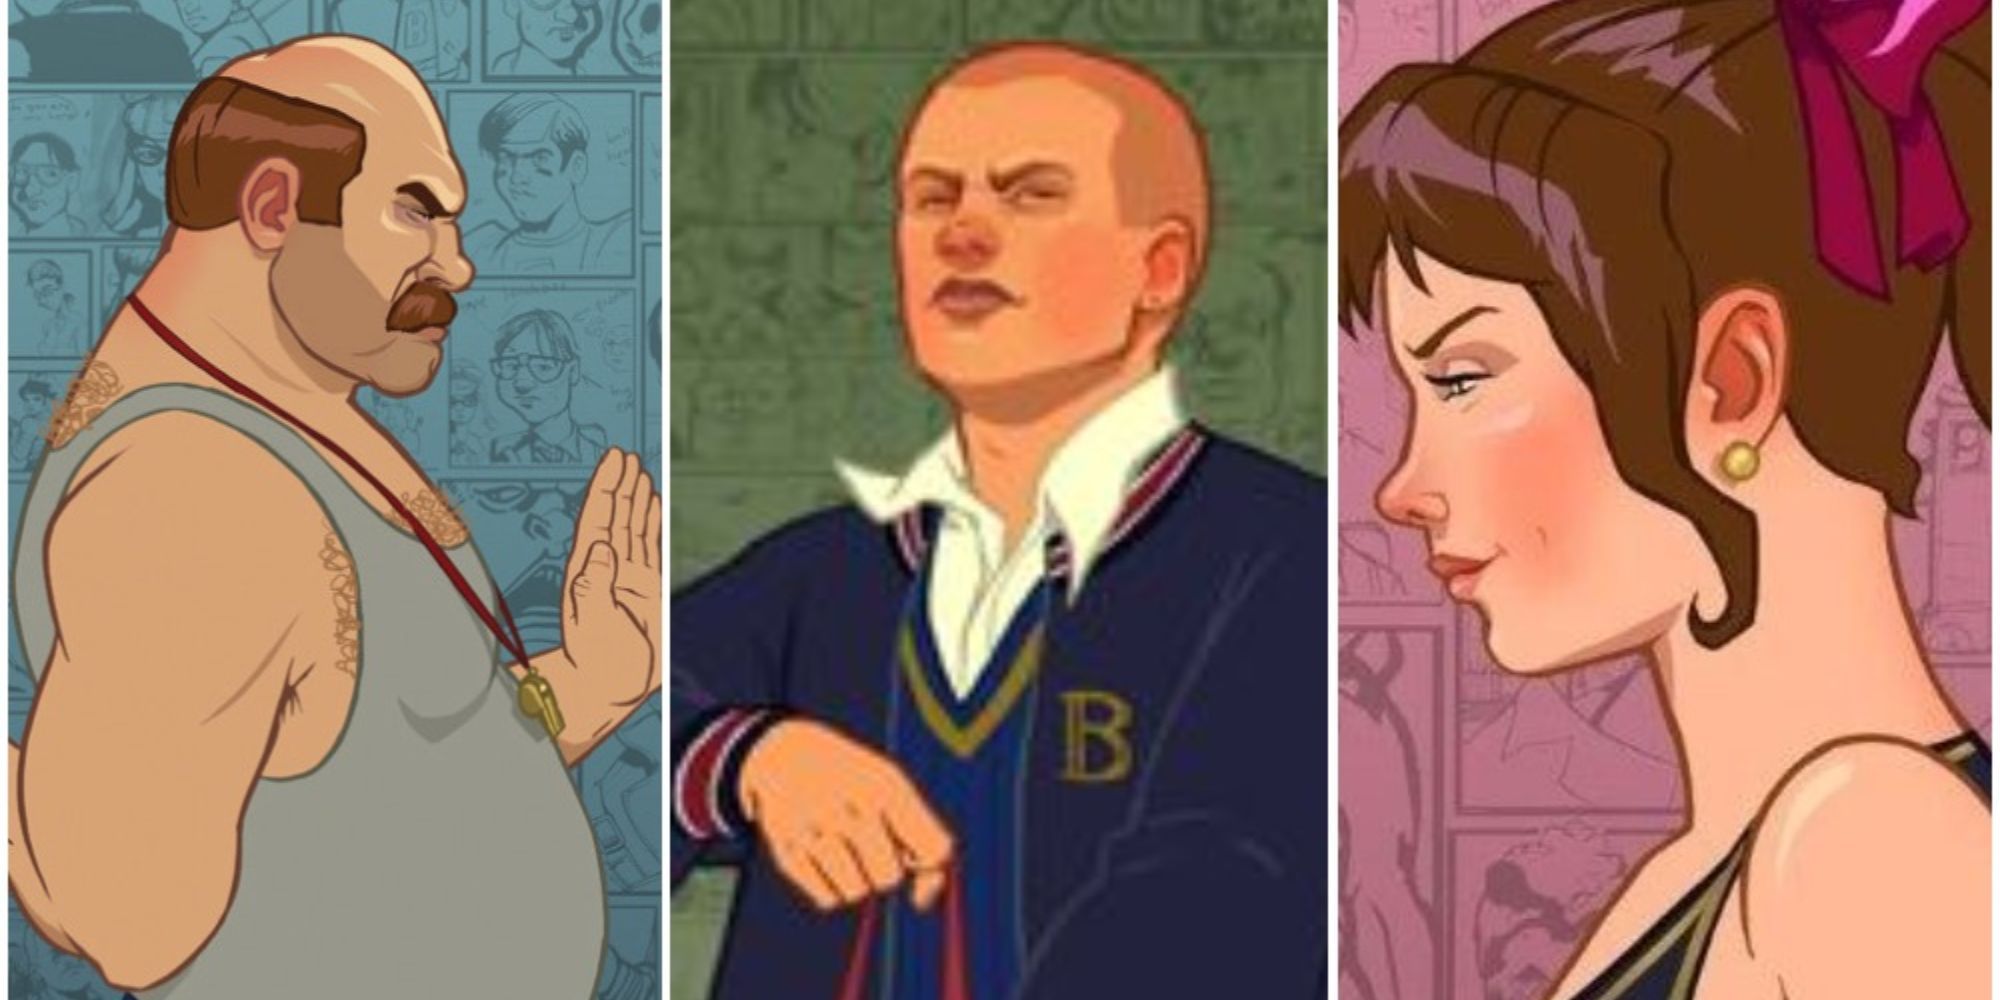 Bully 2 - News and what we'd love to see